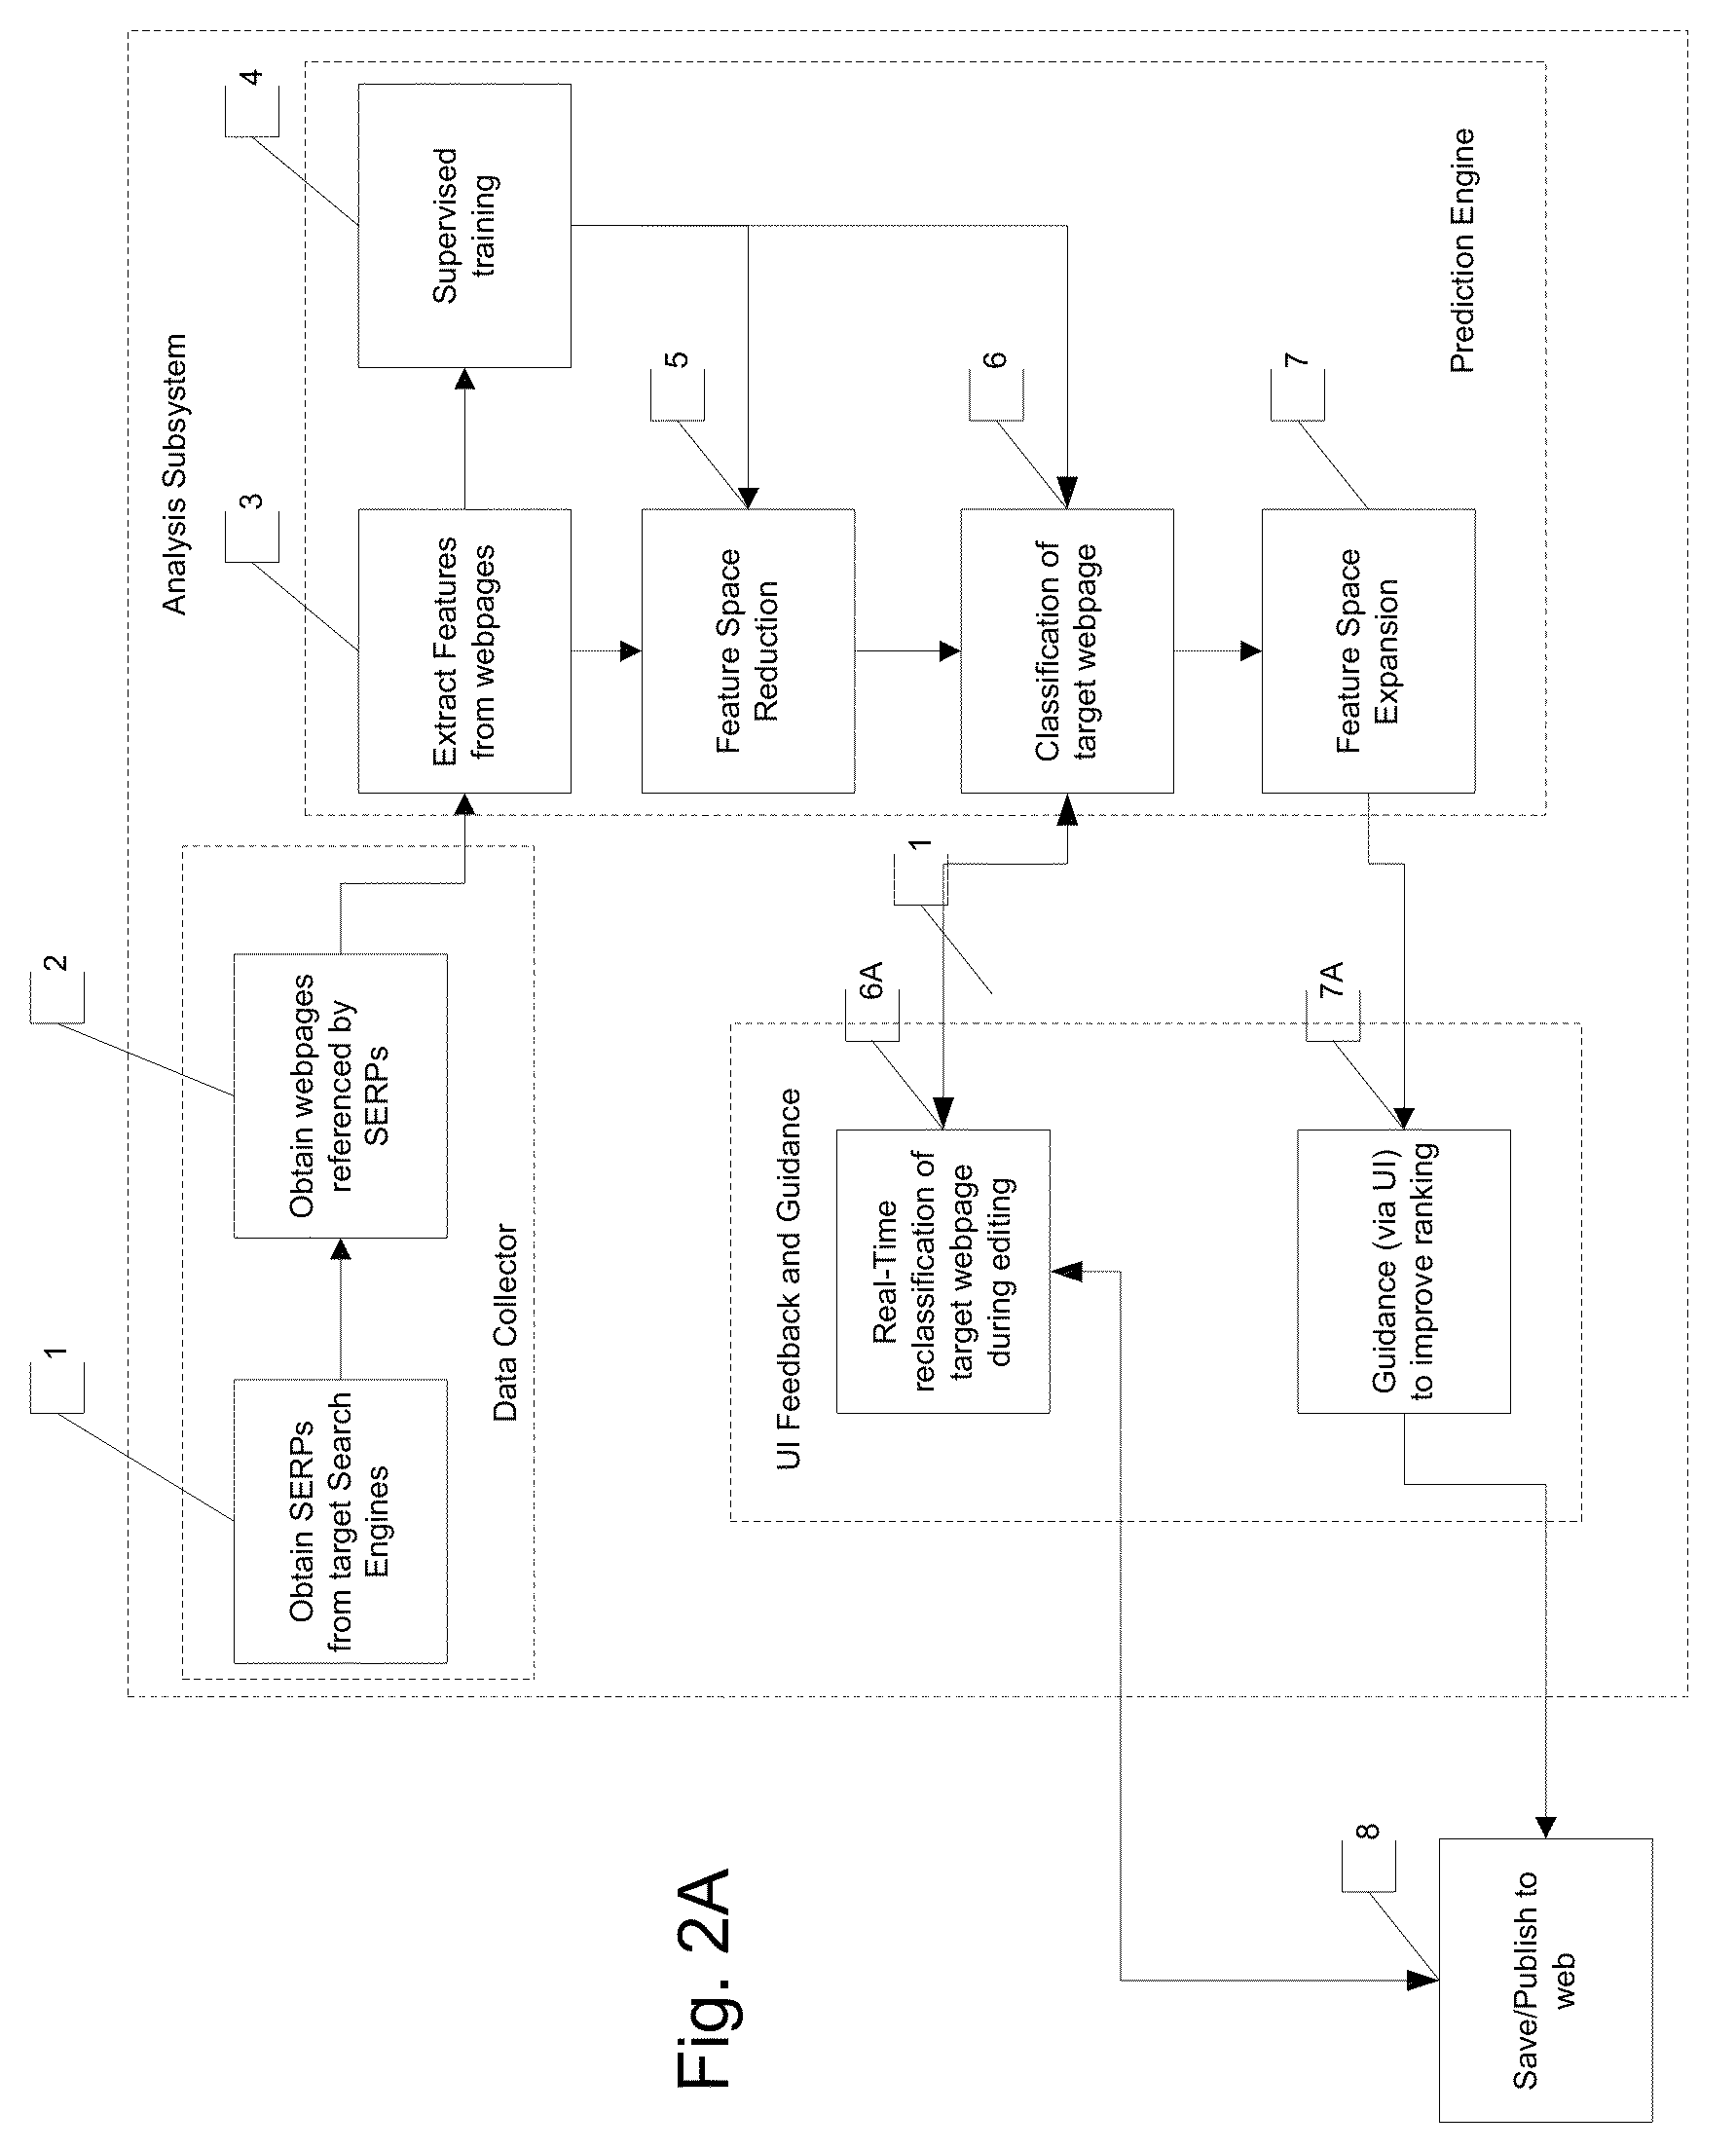 System and method for mark-up language document rank analysis